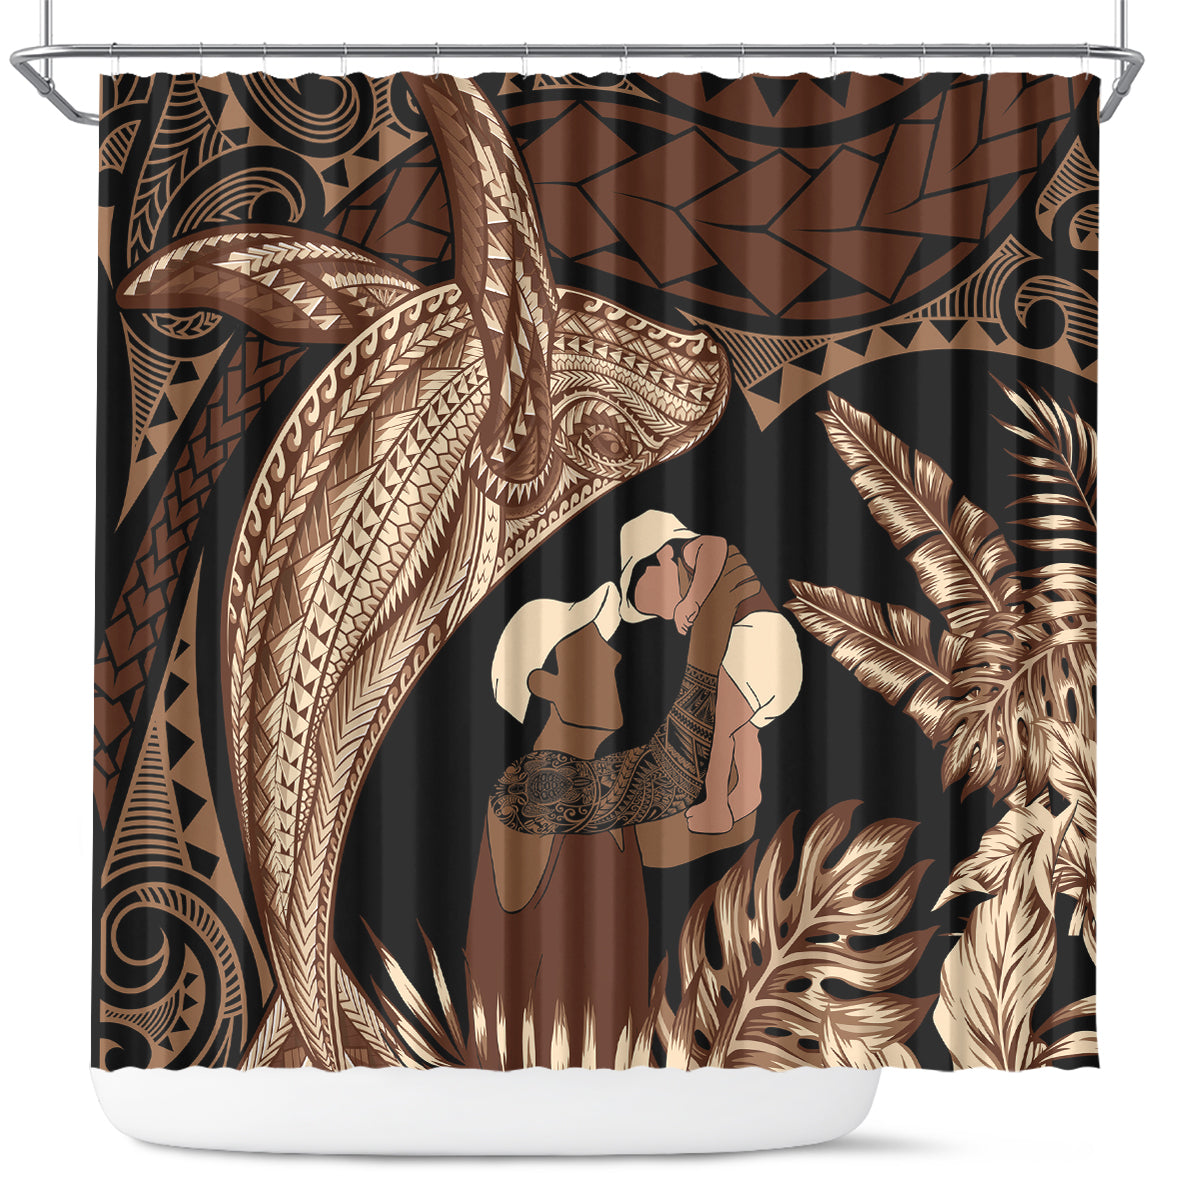 Father's Day Polynesian Pattern Shower Curtain Tropical Humpback Whale